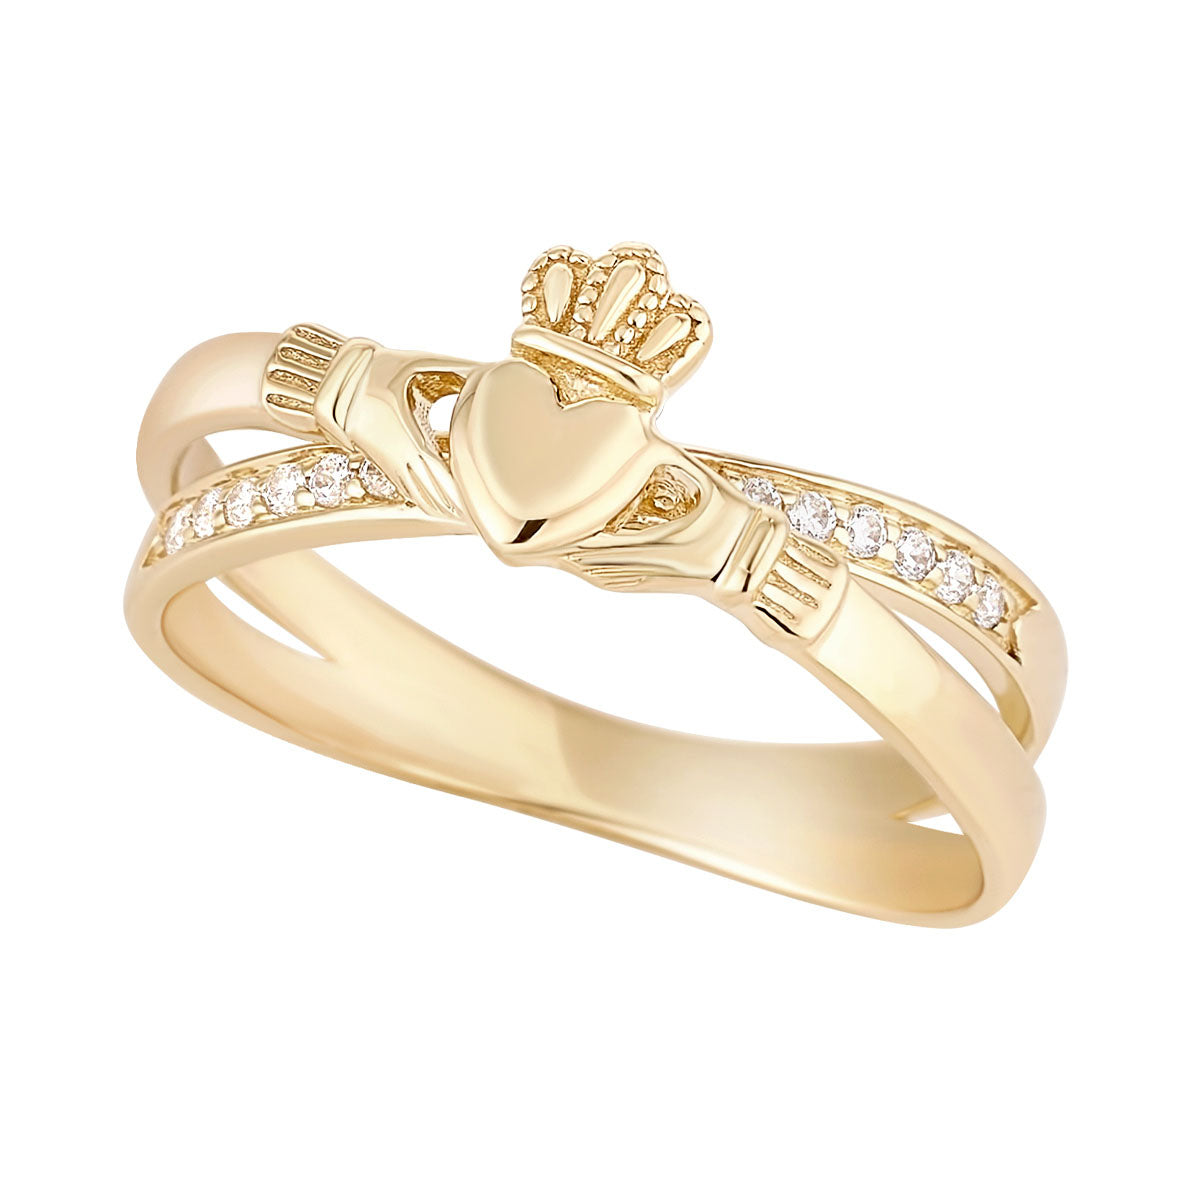 Stock image of 10K Gold Cz Claddagh Crossover Ring S21153